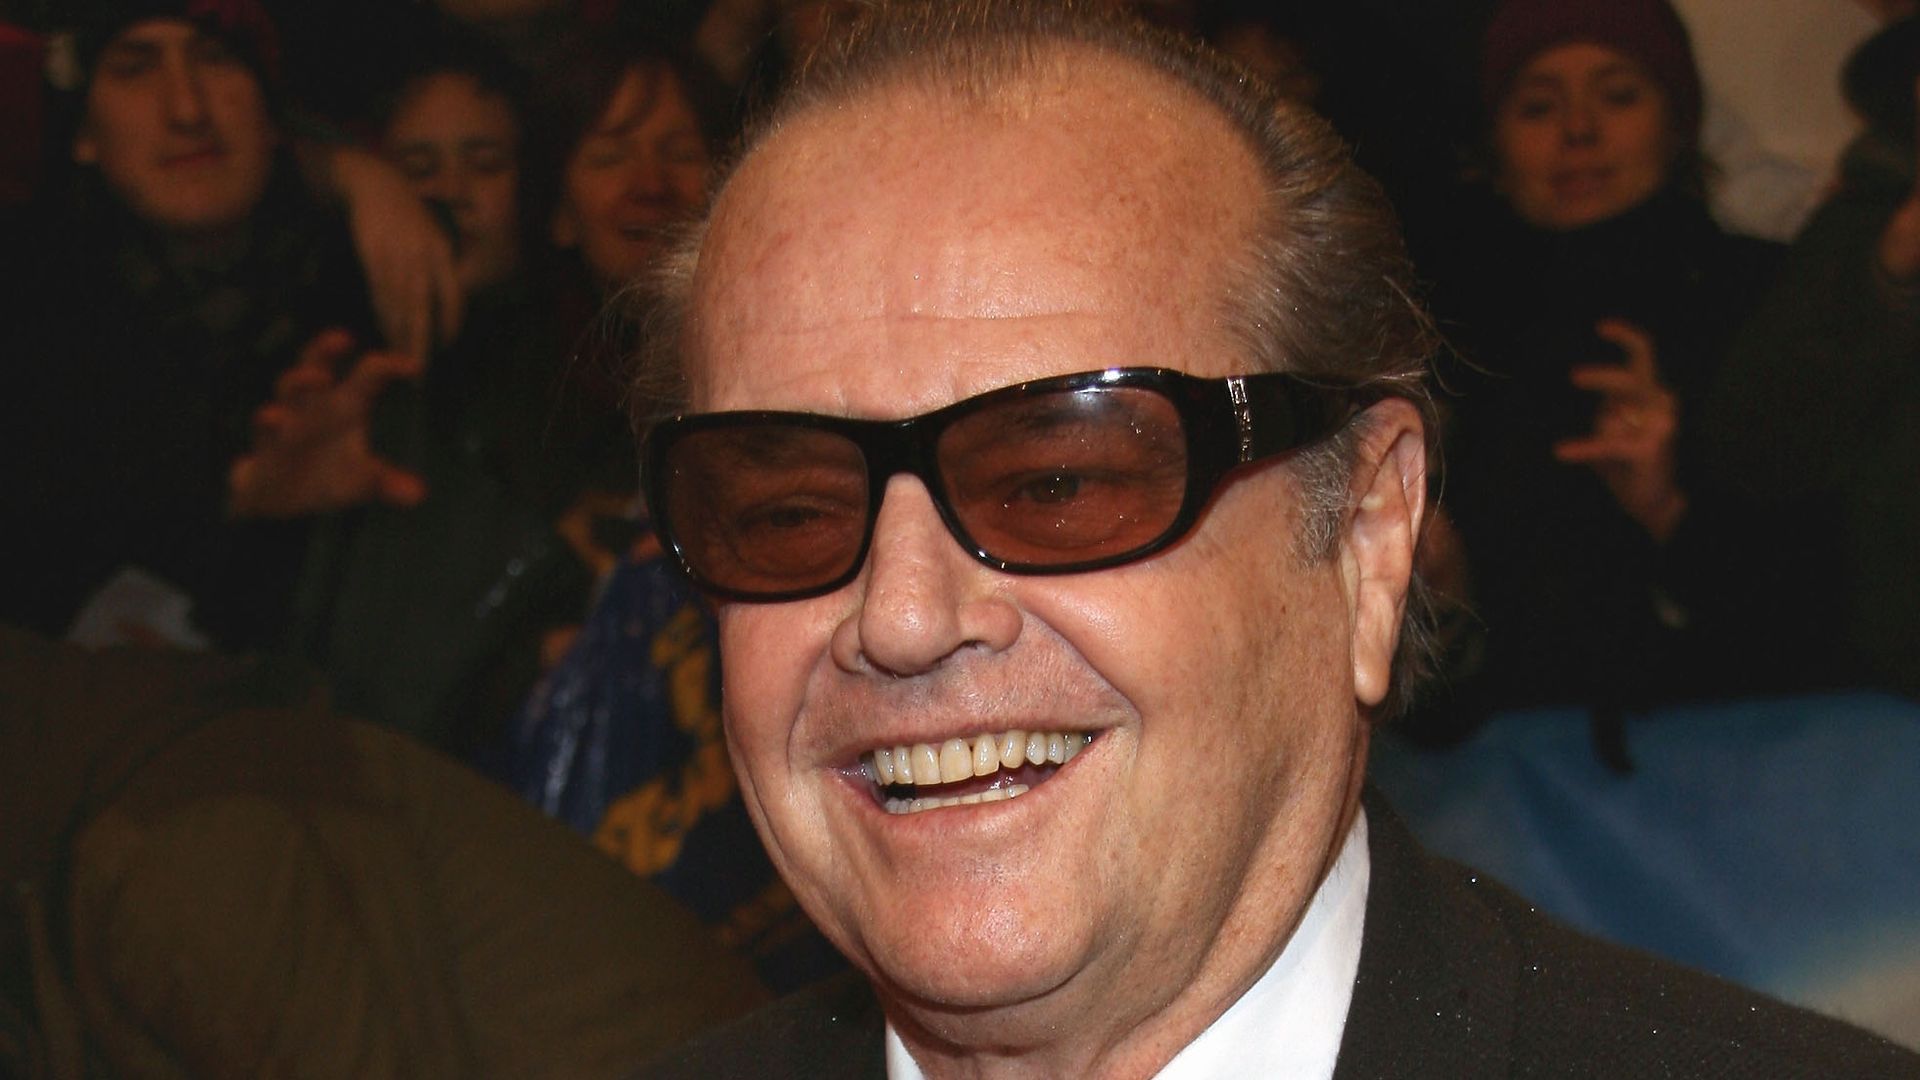 Jack Nicholson sports beard and wild hair in last public photograph as actor turns 87